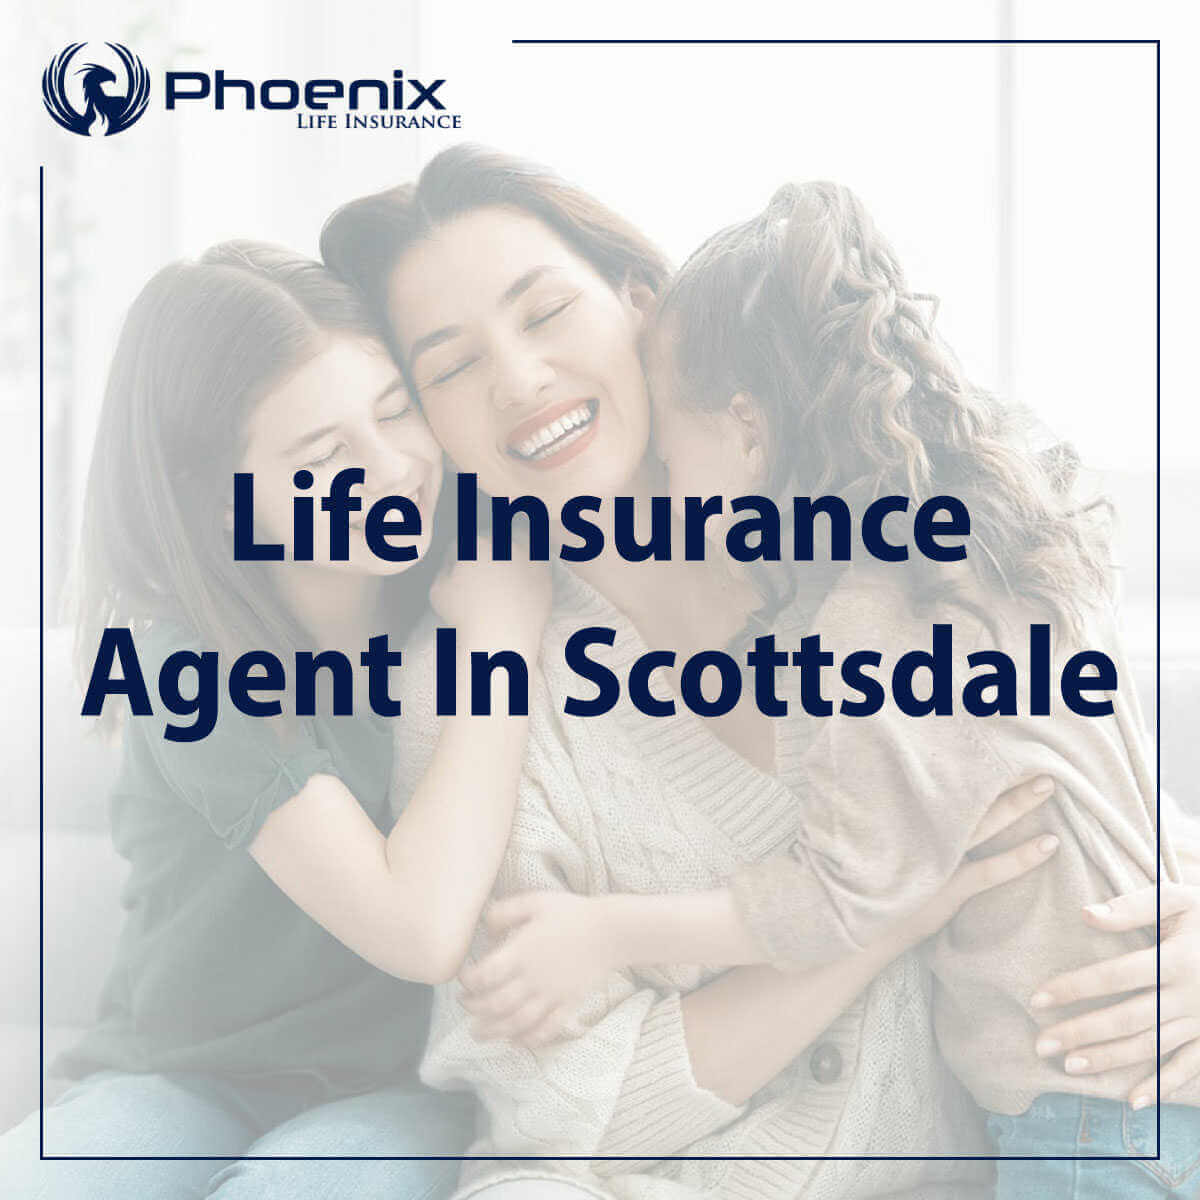 Life Insurance

Agent In Scottsdale